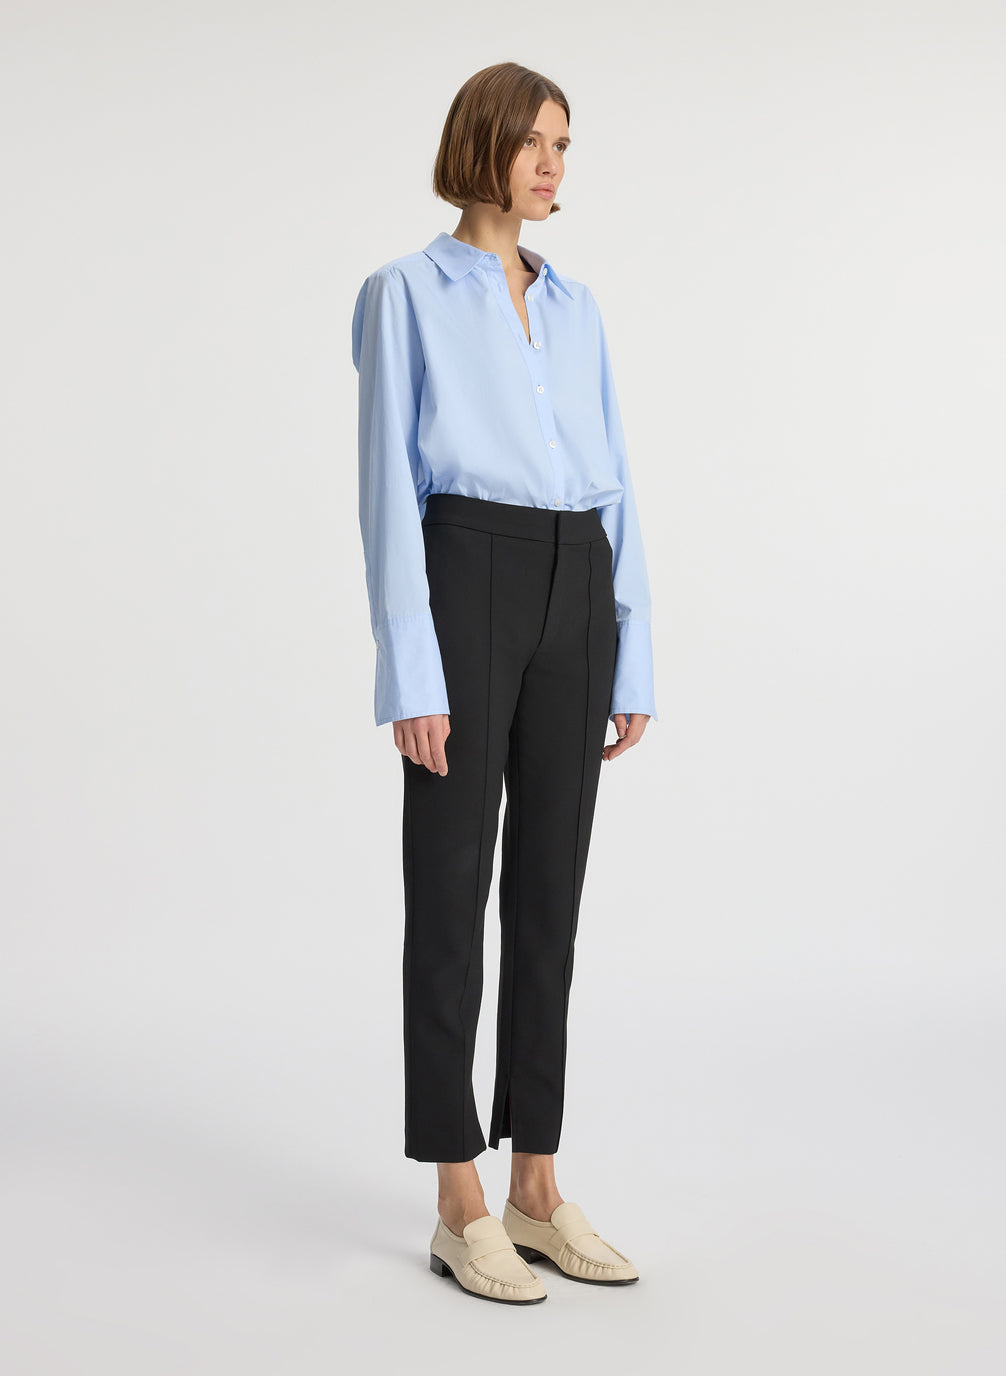 side view of woman wearing light blue button down collared shirt and black ankle length pants